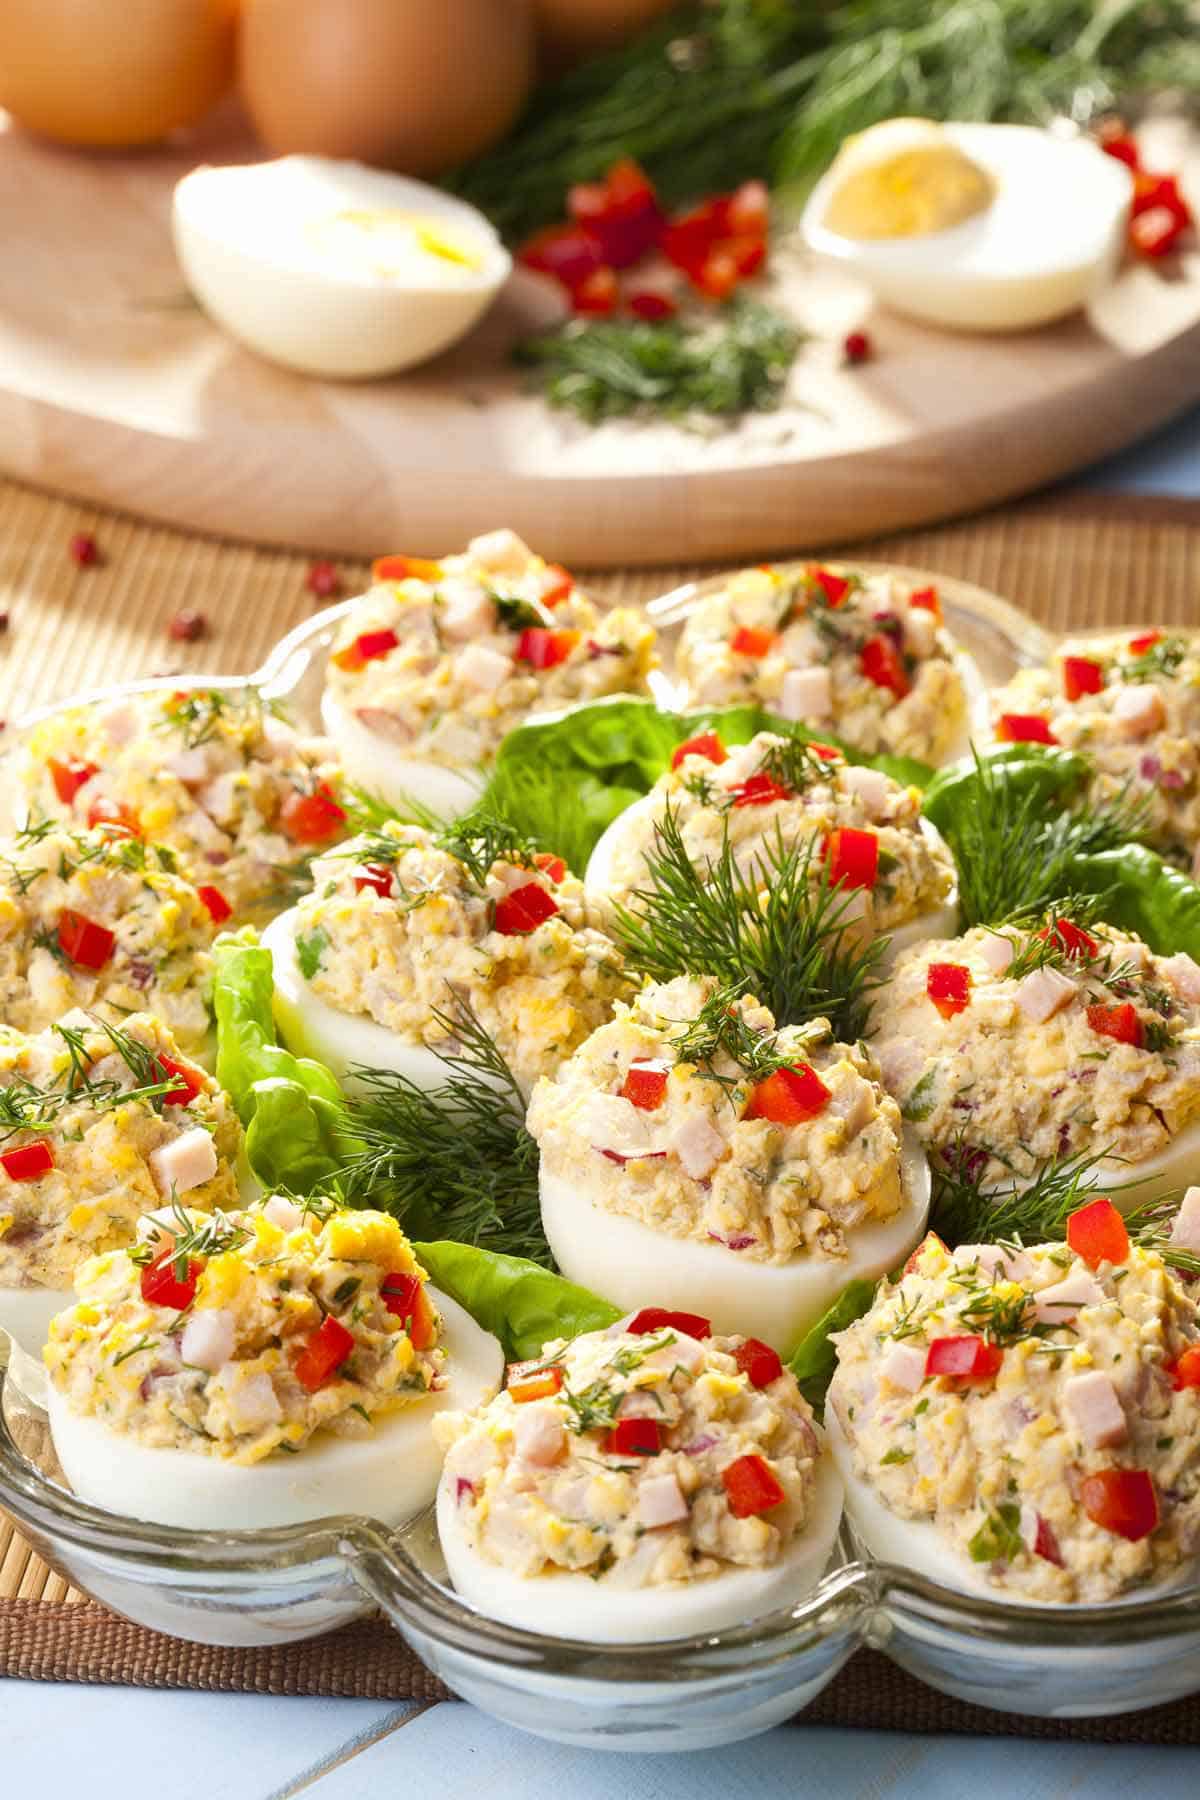 Plate of hardboiled eggs stuffed with chicken salad.